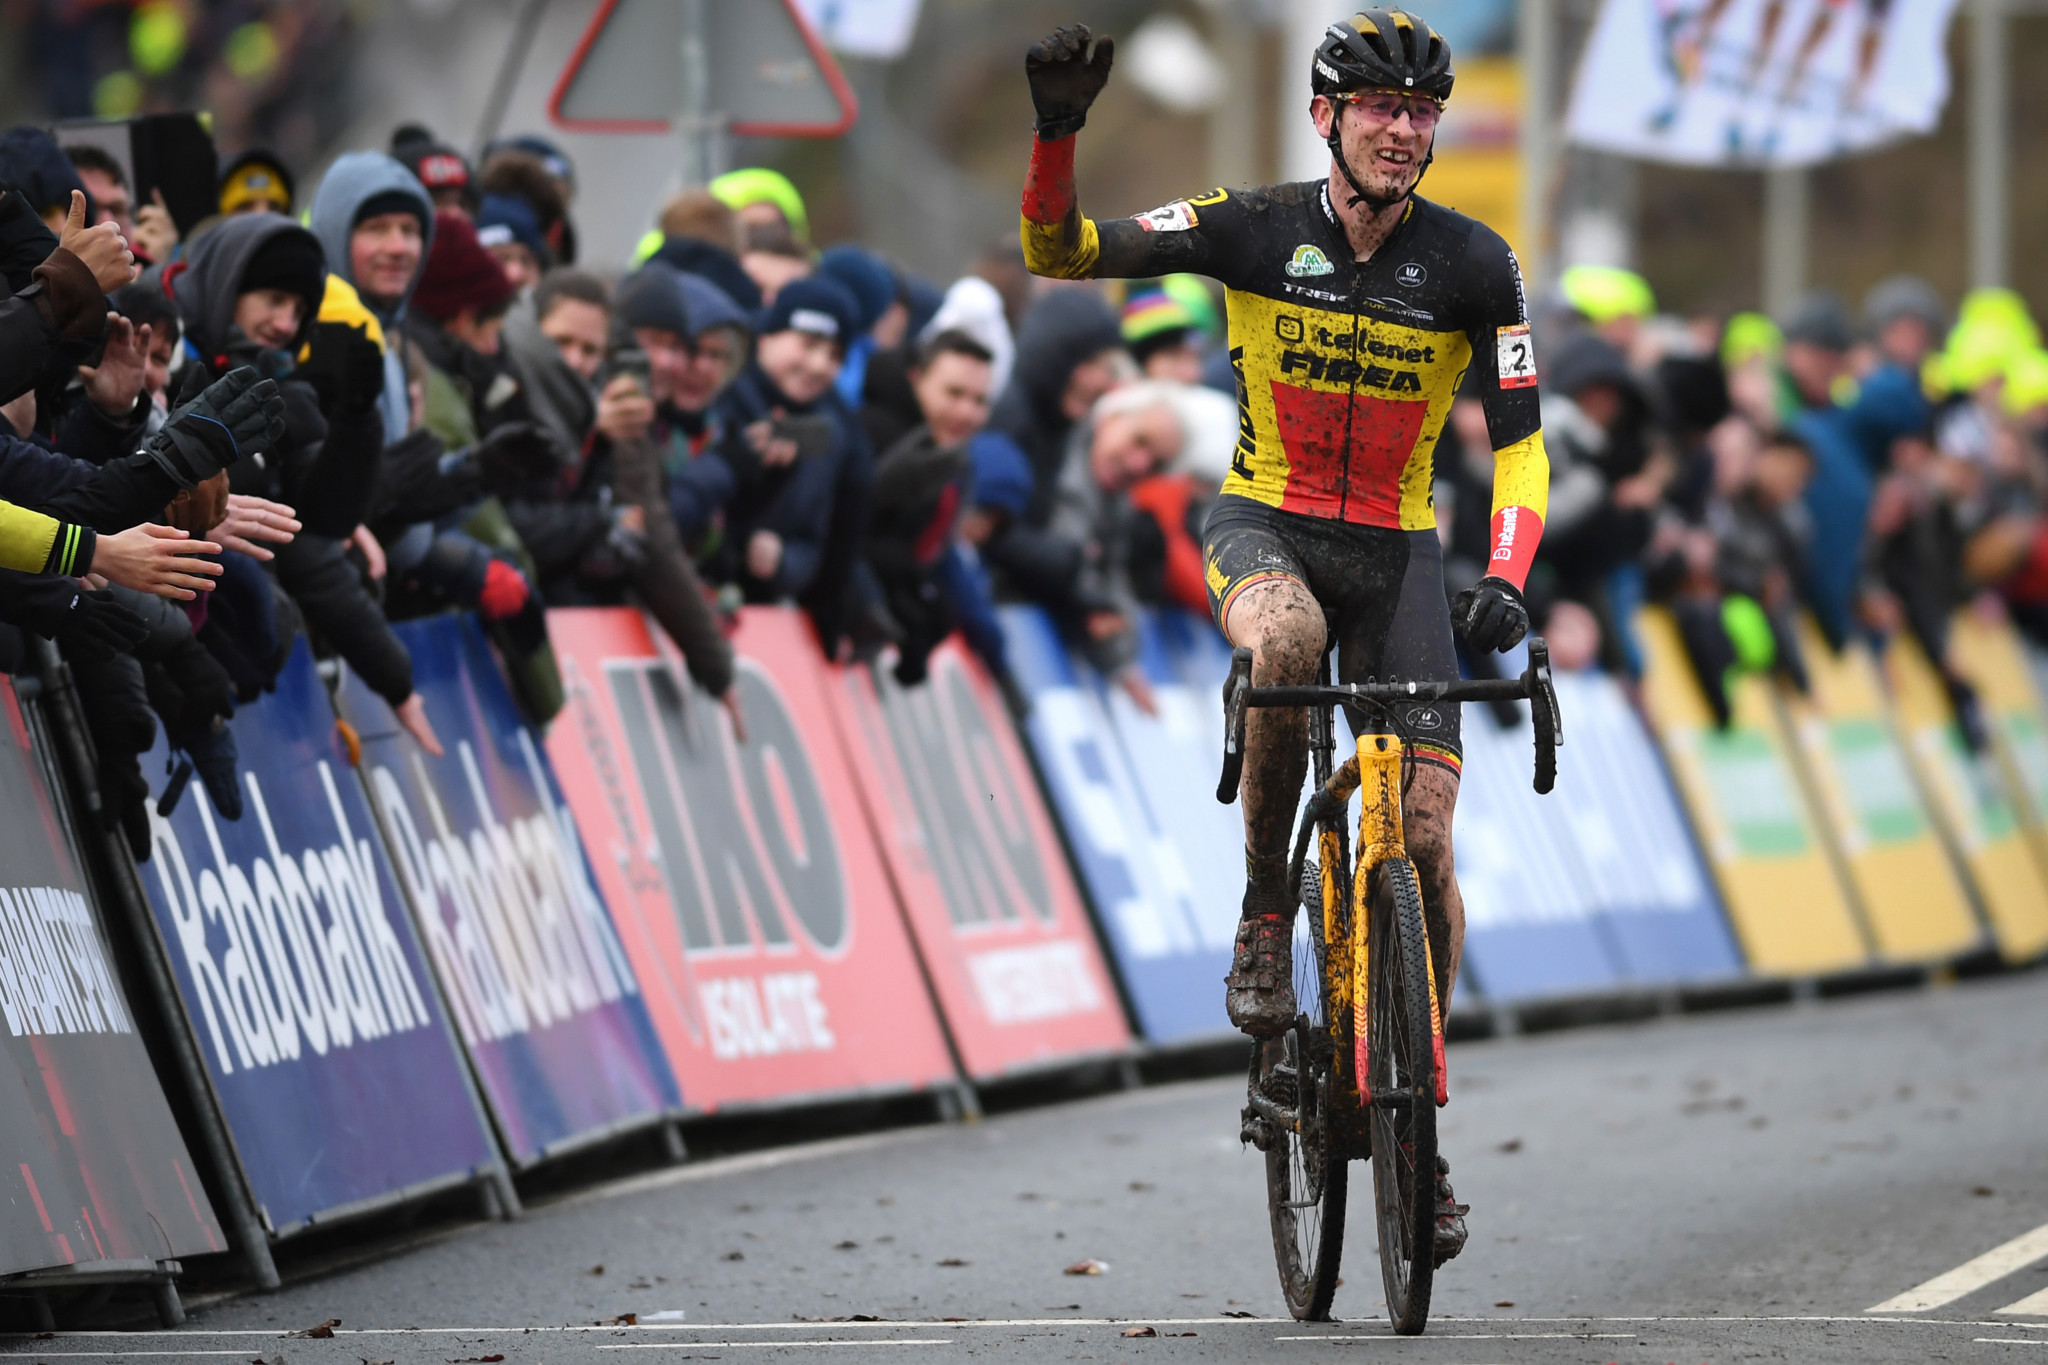 Aerts seals overall Cyclo-Cross World Cup victory with second place finish in Hoogerheide